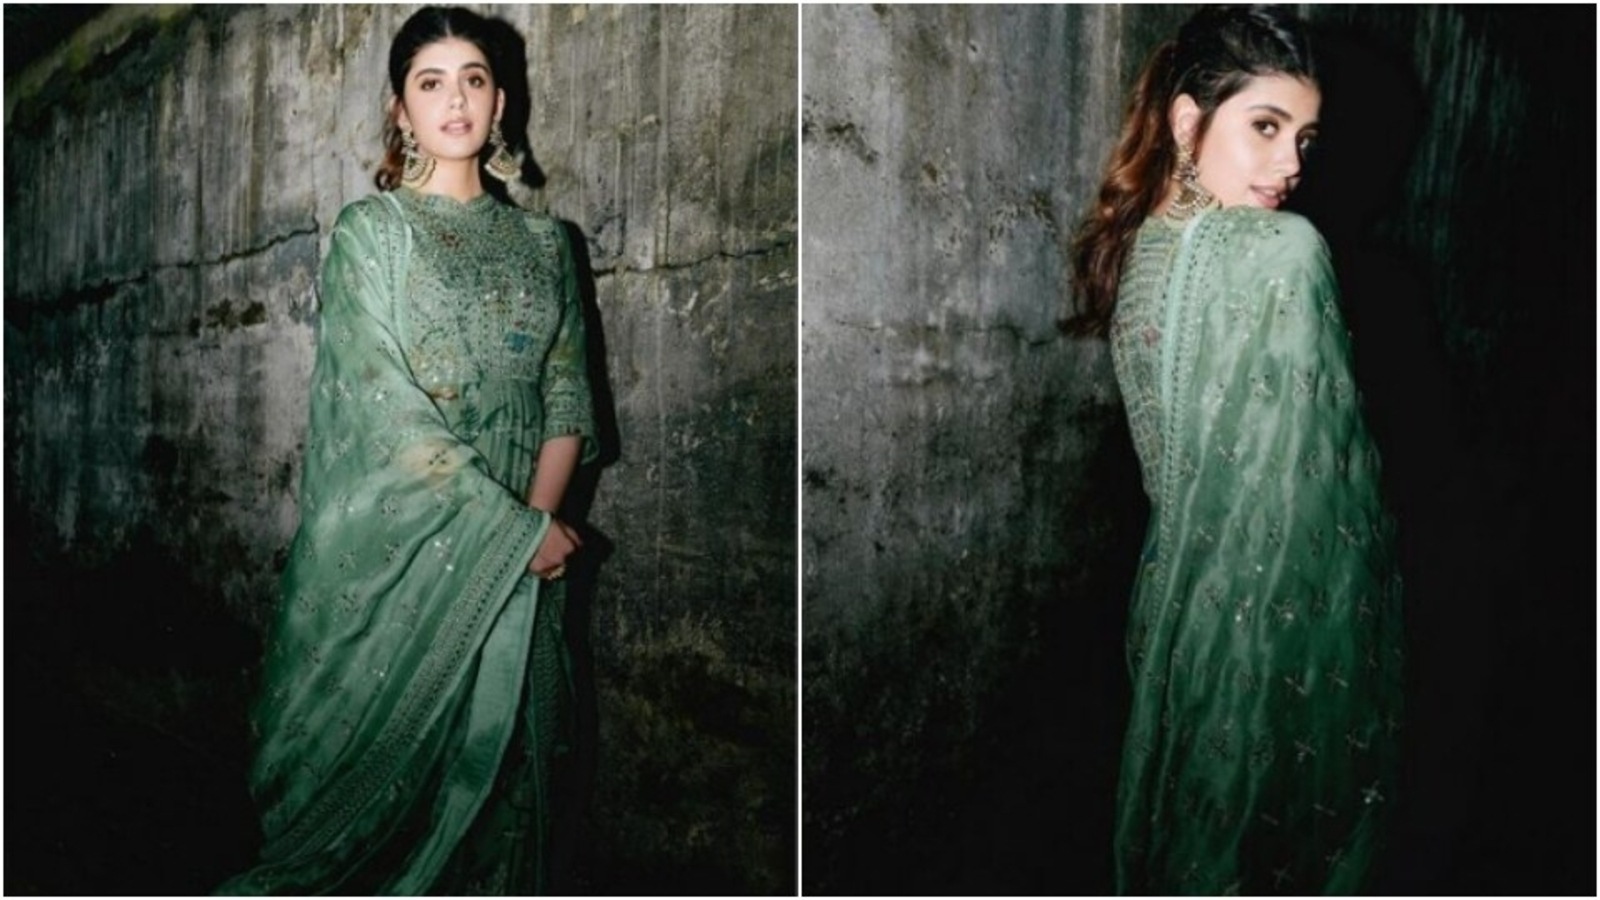 Sanjana Sanghi’s Navratri attire is perfect for today and every festive day